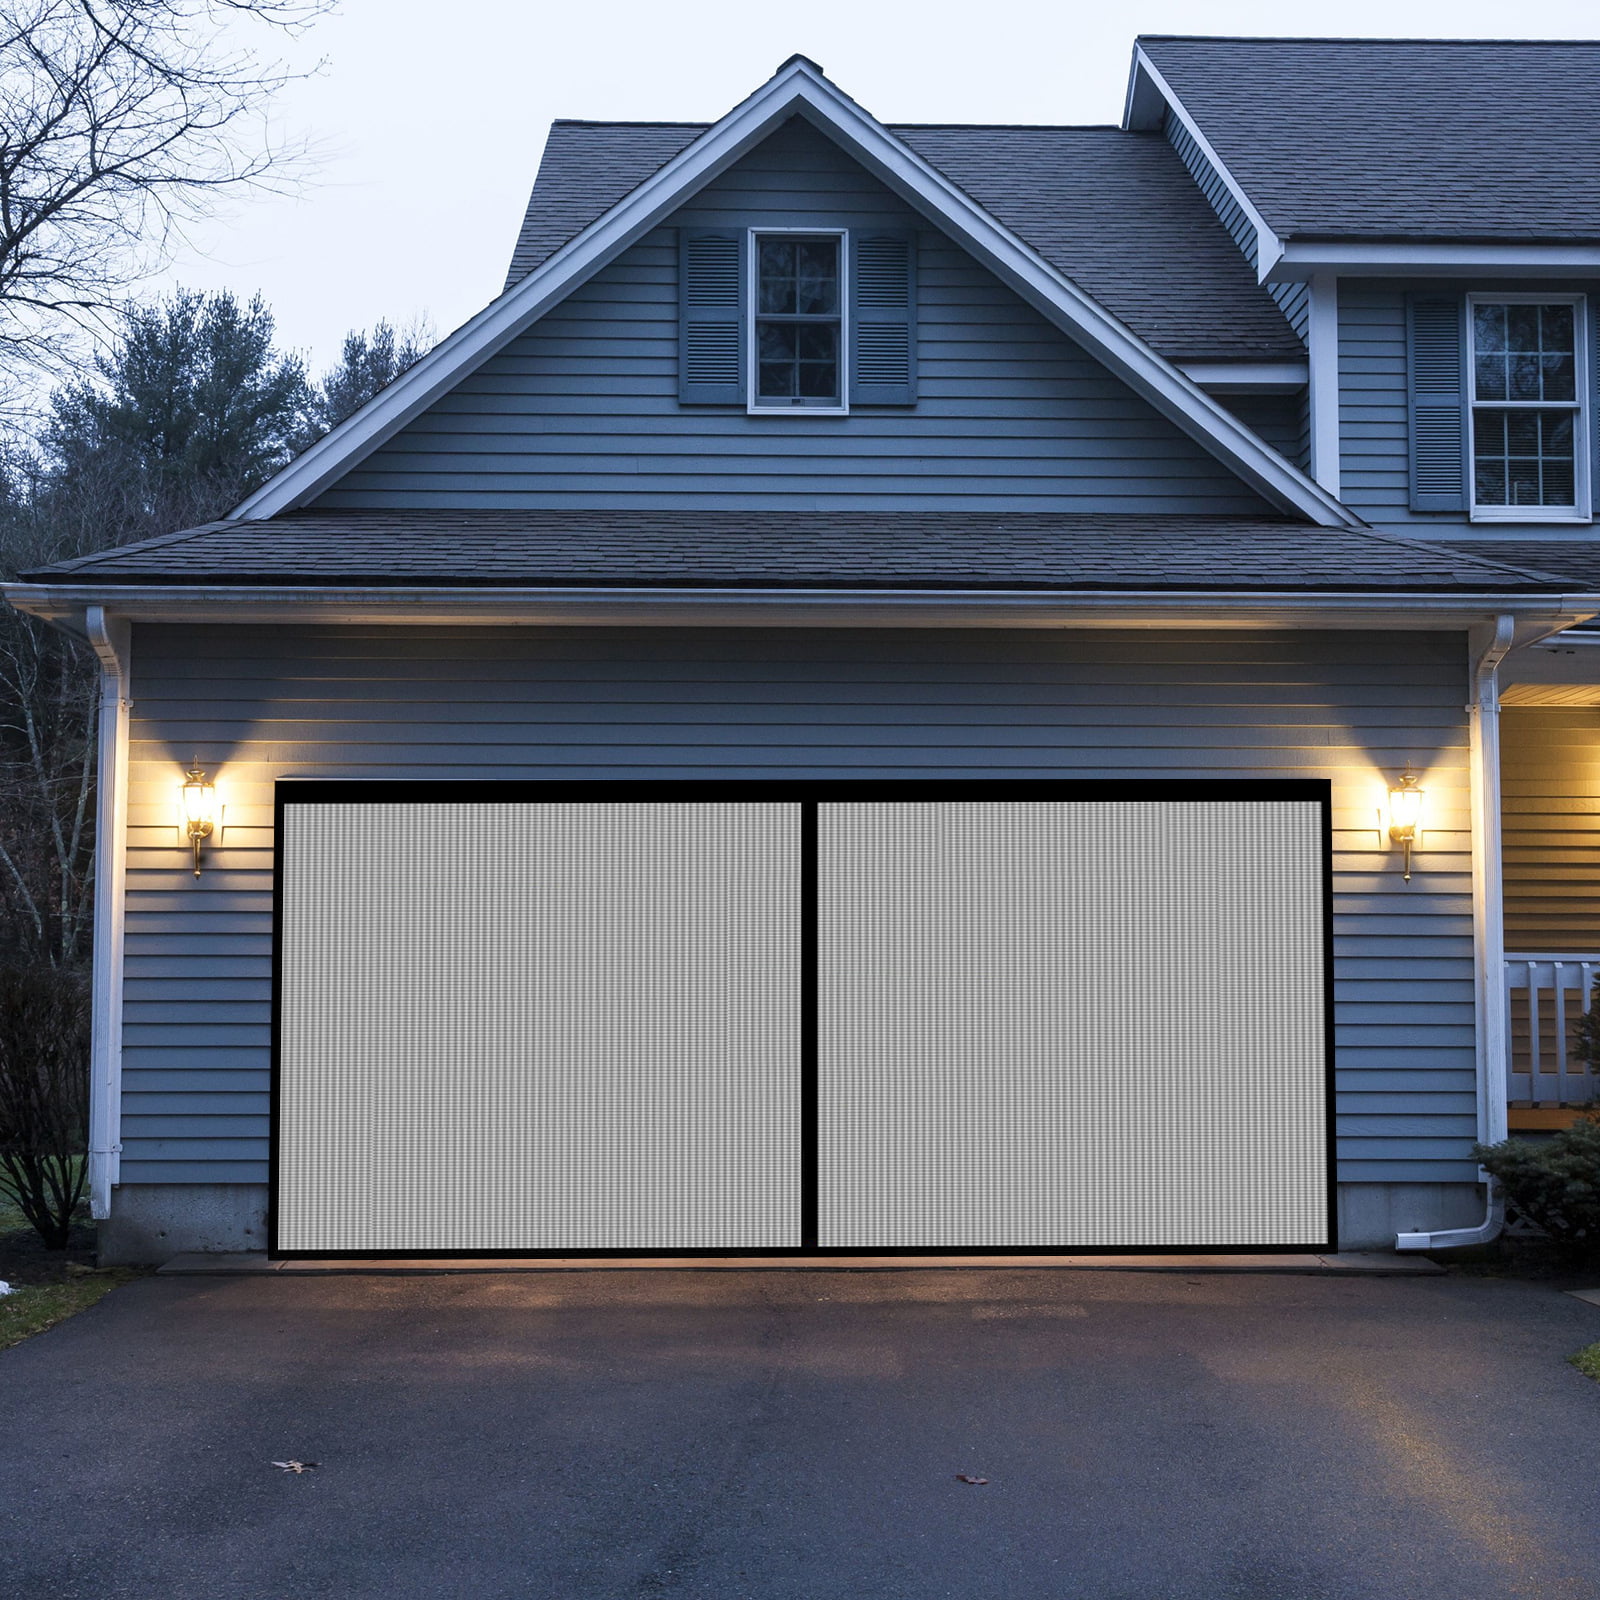 Self Sealing Fiberglass Mesh Magnetic Closure for Quick Entry-Easy to Install Dakaly Garage Door Screens Car Door 13x6.5 ft Bottom of The Screen is Weighted 